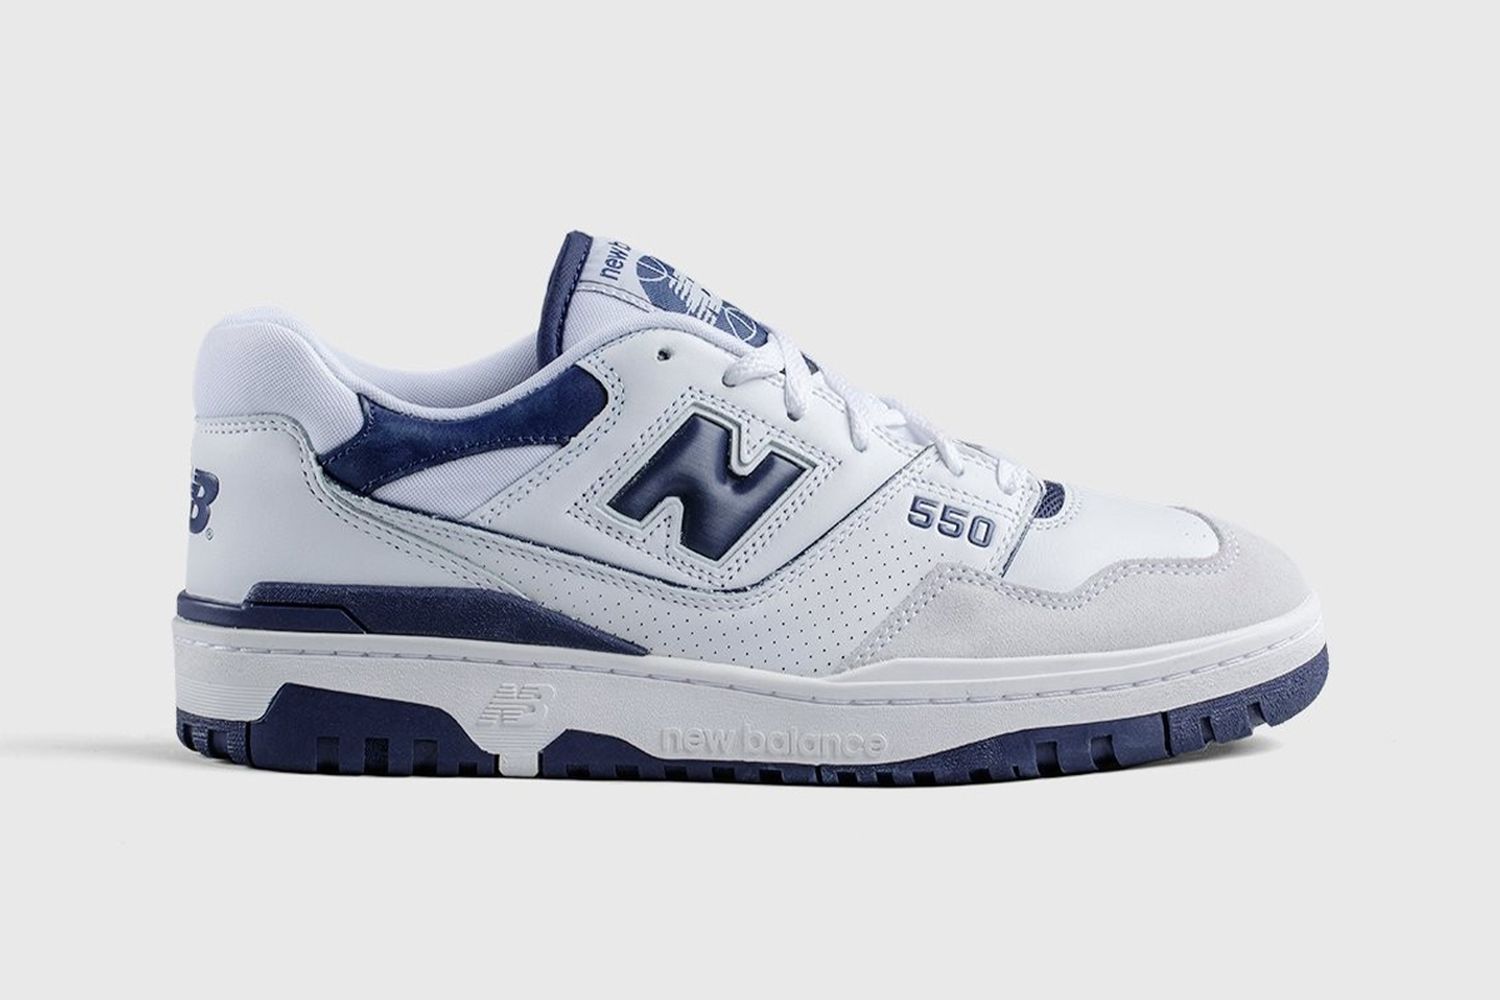 New Balance 550 Pale Blue Release Information